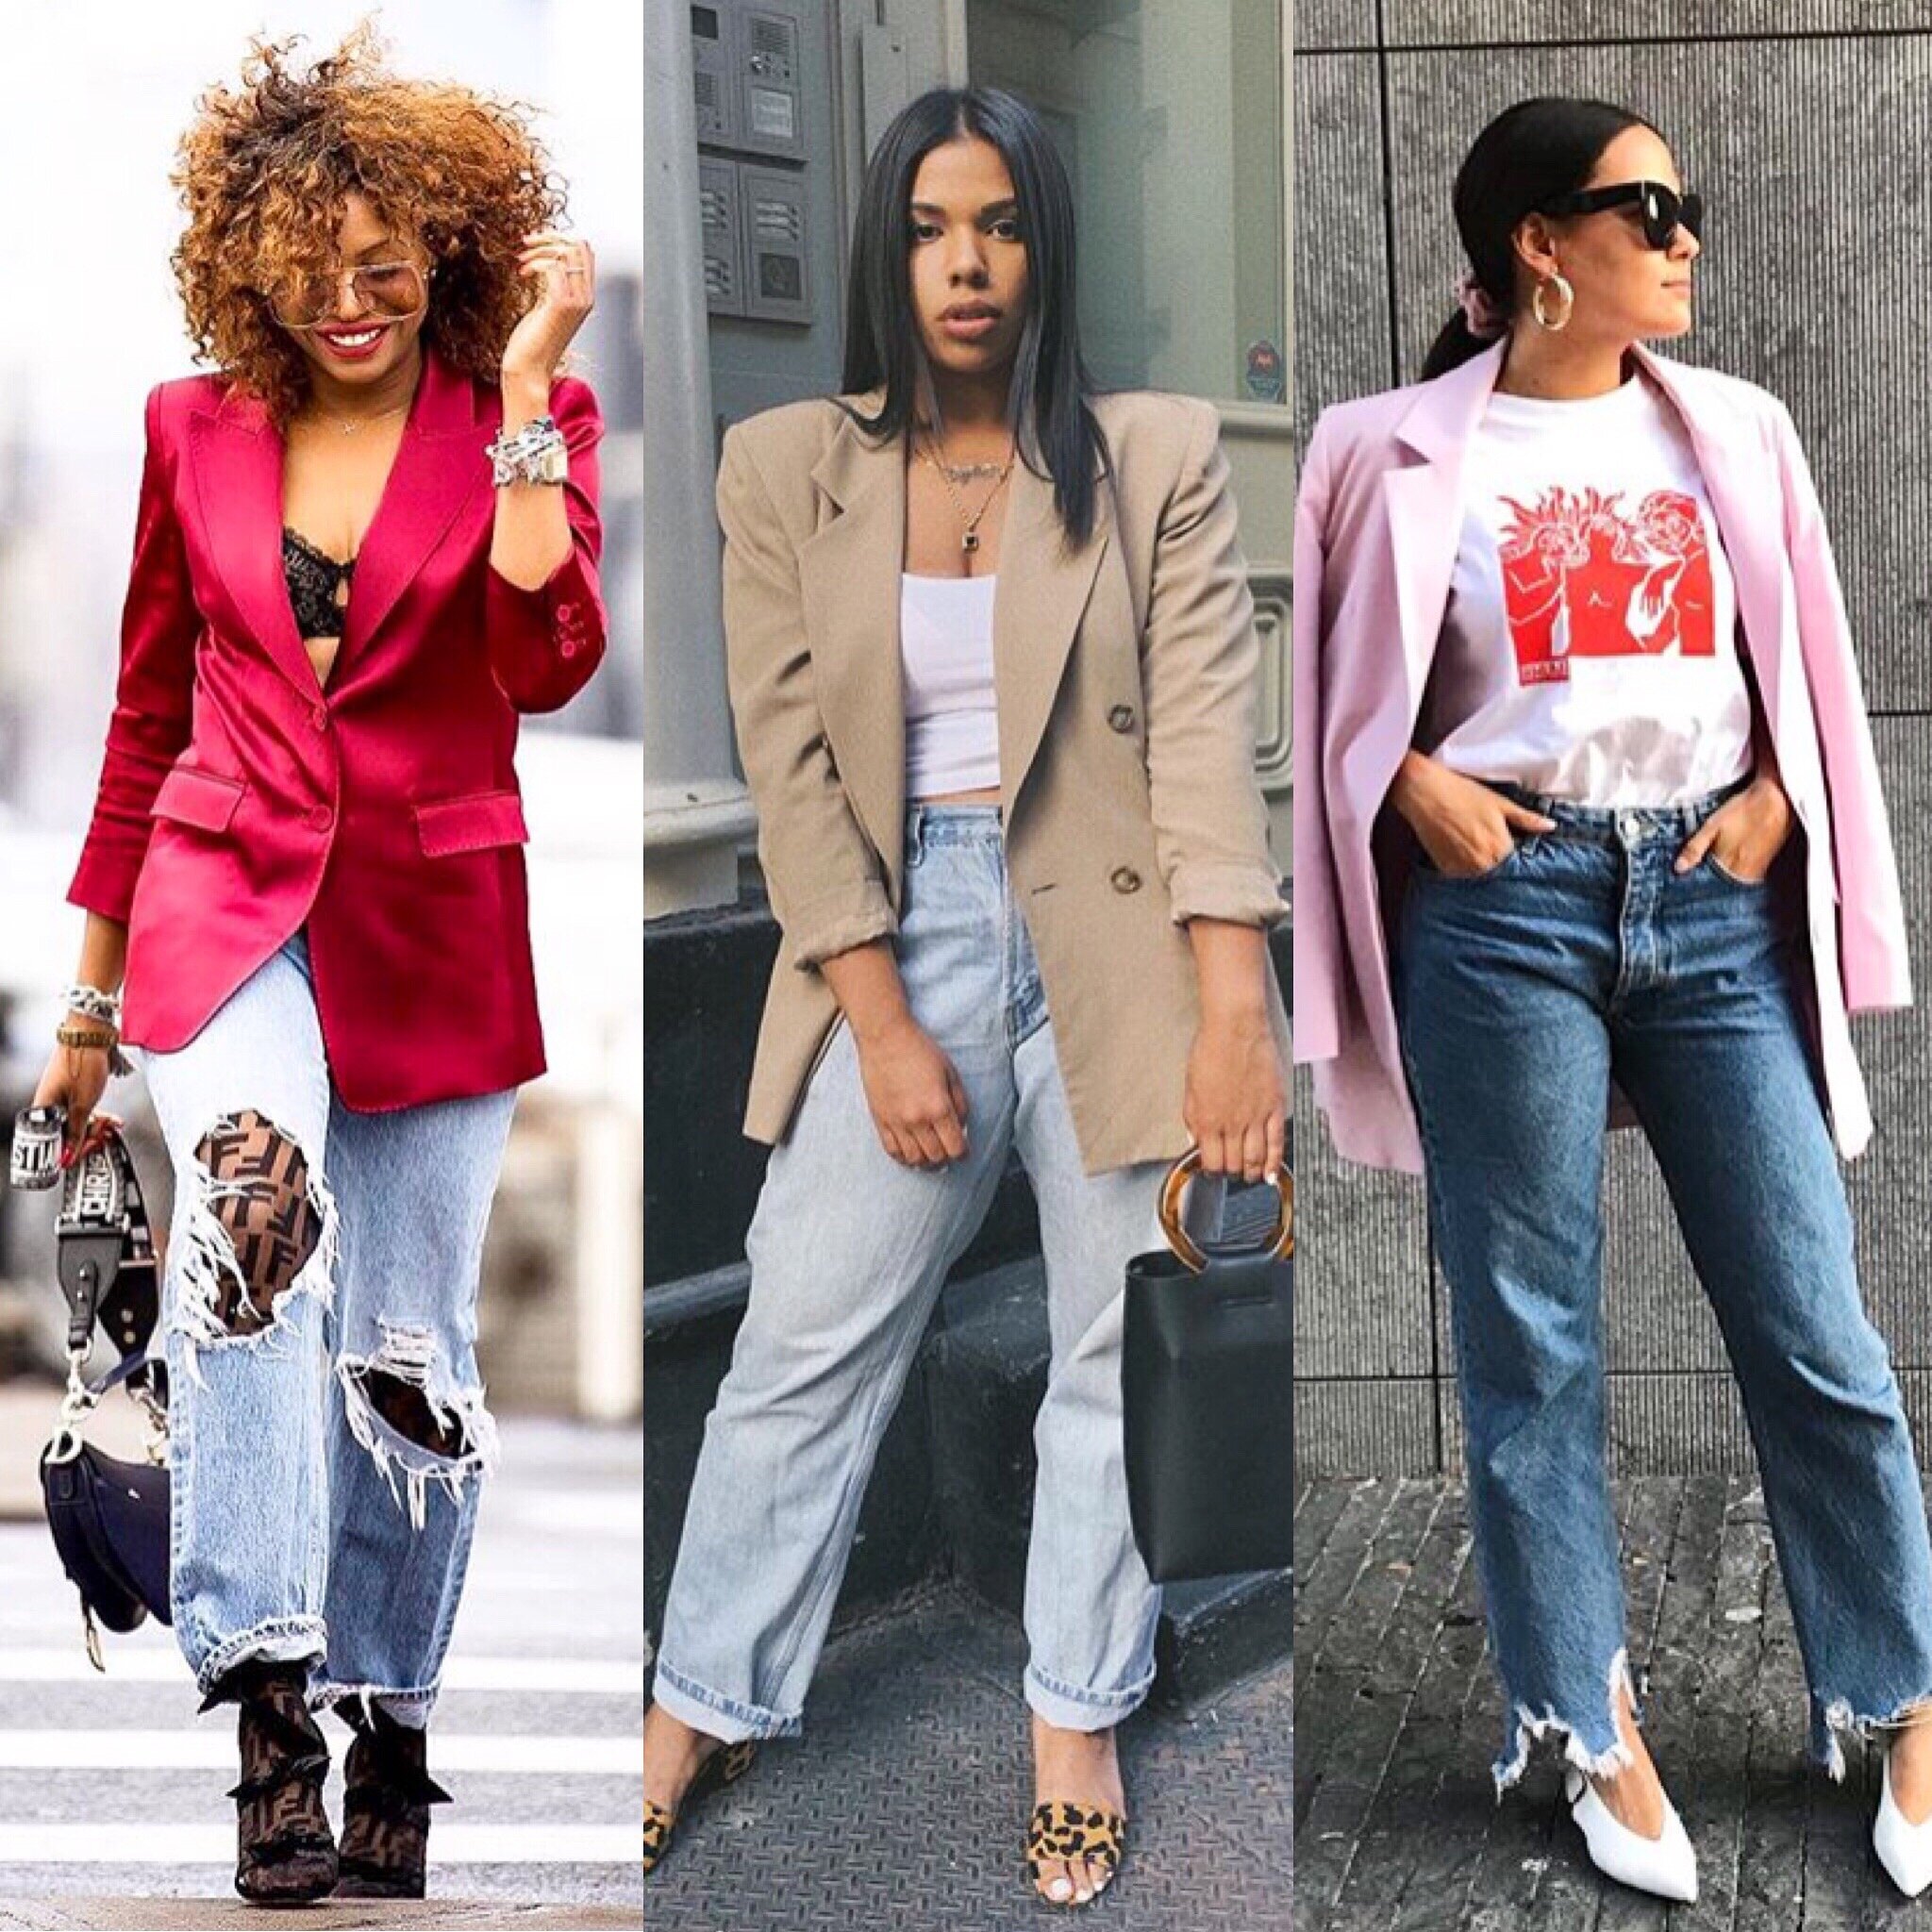   It’s almost impossible to find an outfit you love with jeans that won’t look even better with an oversized blazer. Here’s 3 of my fave ways to style the two: 1. With the blazer as your top! For day outings, go with a cute bralette or sports bra und